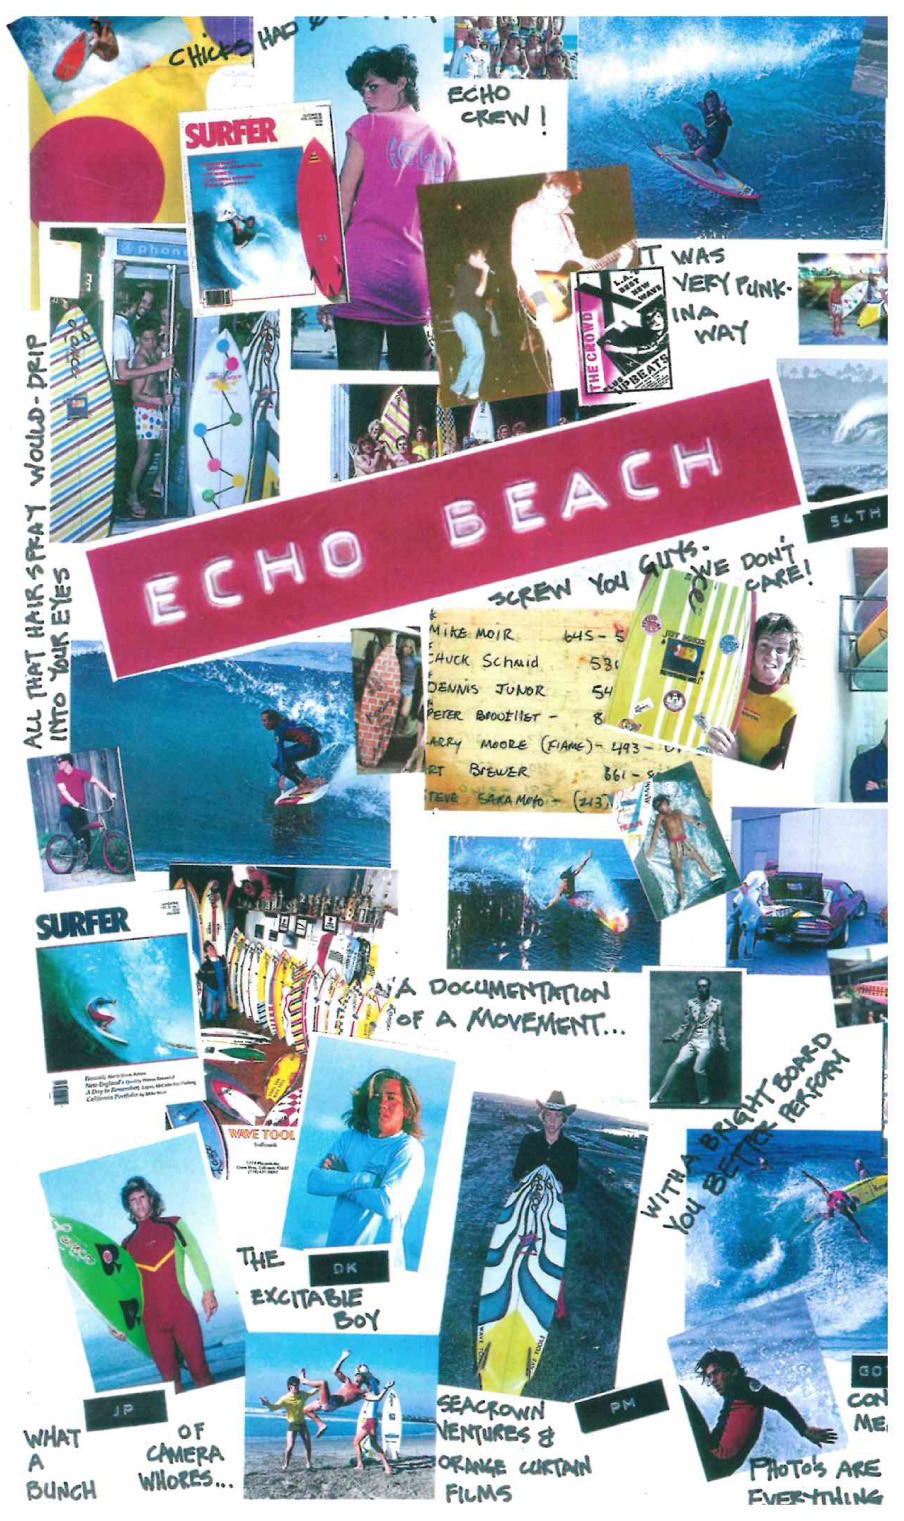 Dvd Echo Beach - A Documentation Of A Movement - by Jeff Parker